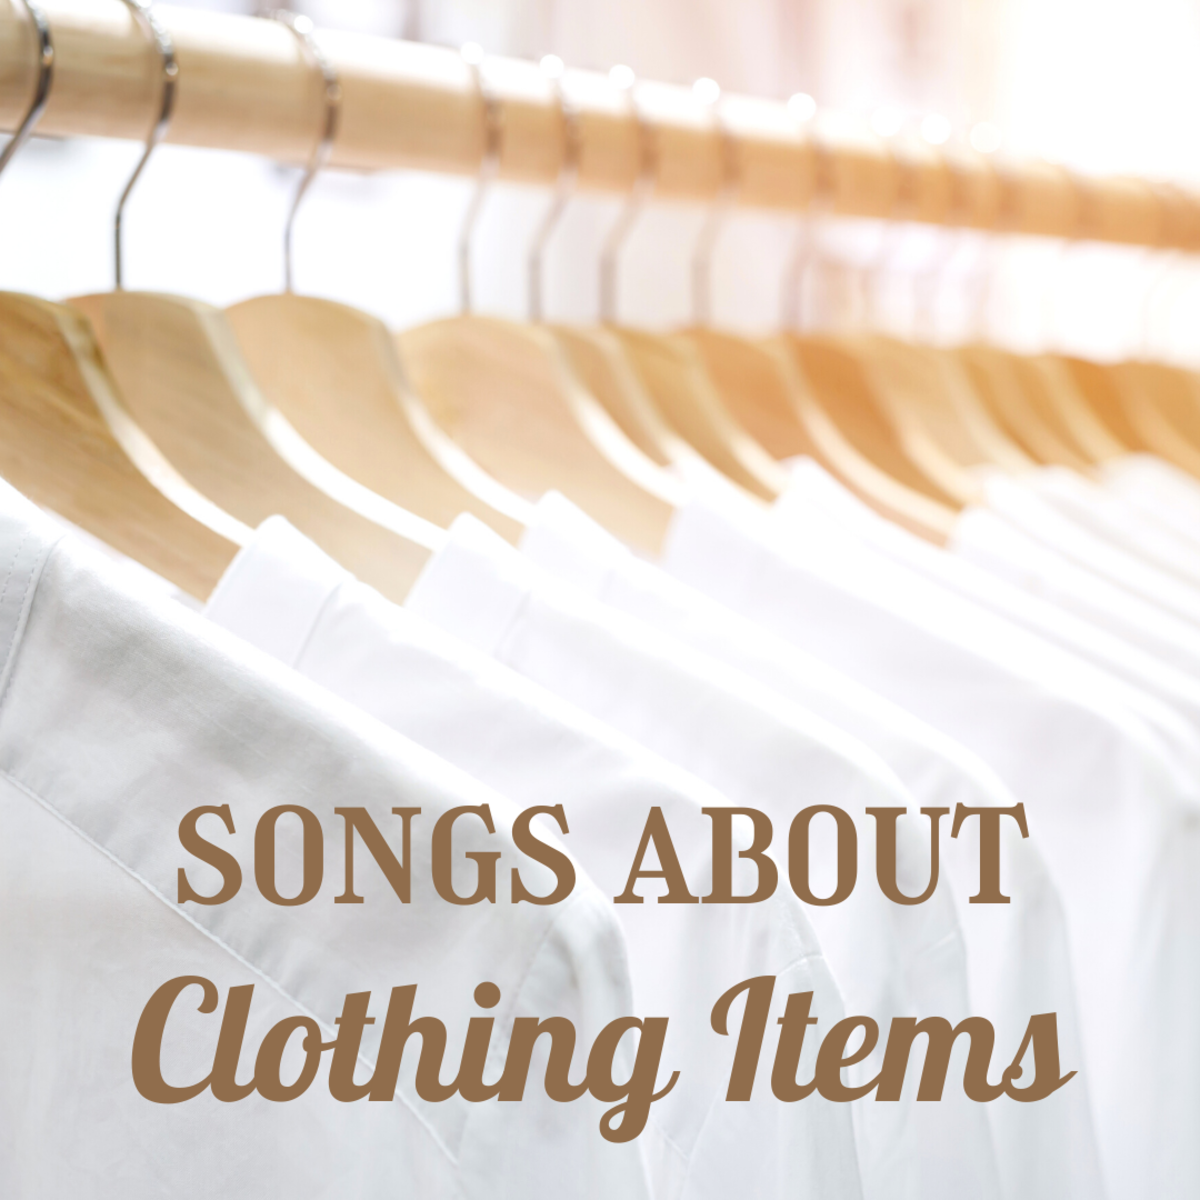 Whether it's a metaphor or a song that's actually about a favorite sweater, find the perfect clothing-related music here!